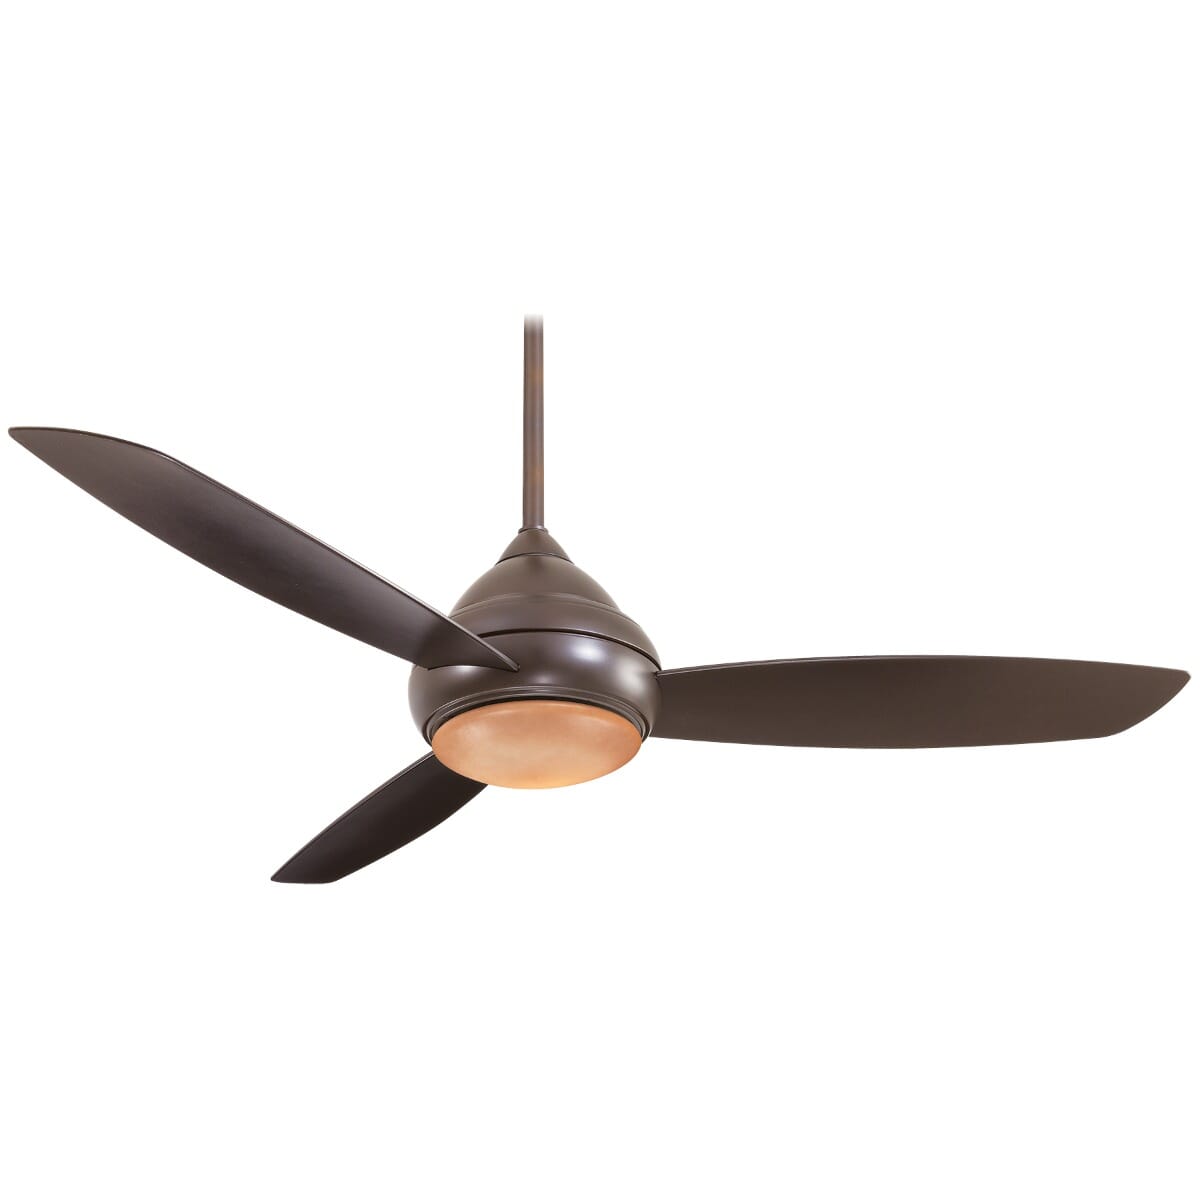 Minka-Aire Concept I 58"" LED Indoor/Outdoor Ceiling Fan in Oil Rubbed Bronze -  Minka Aire, F477L-ORB